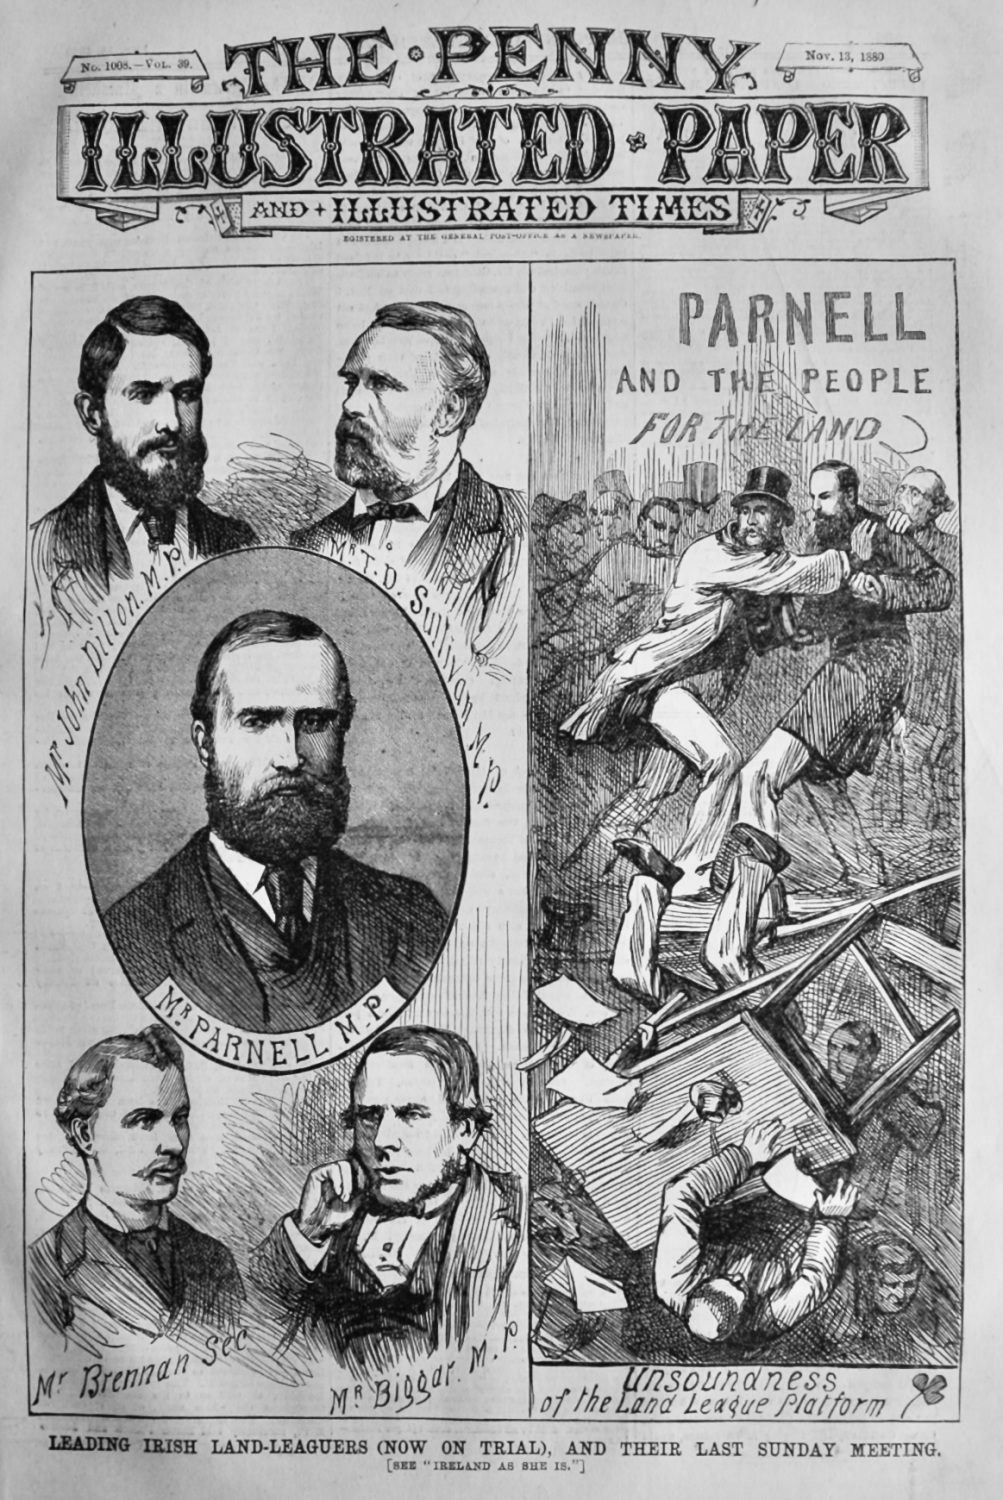 Leading Irish Land-Leaguers (Now on Trial), and their Last Sunday Meeting. 